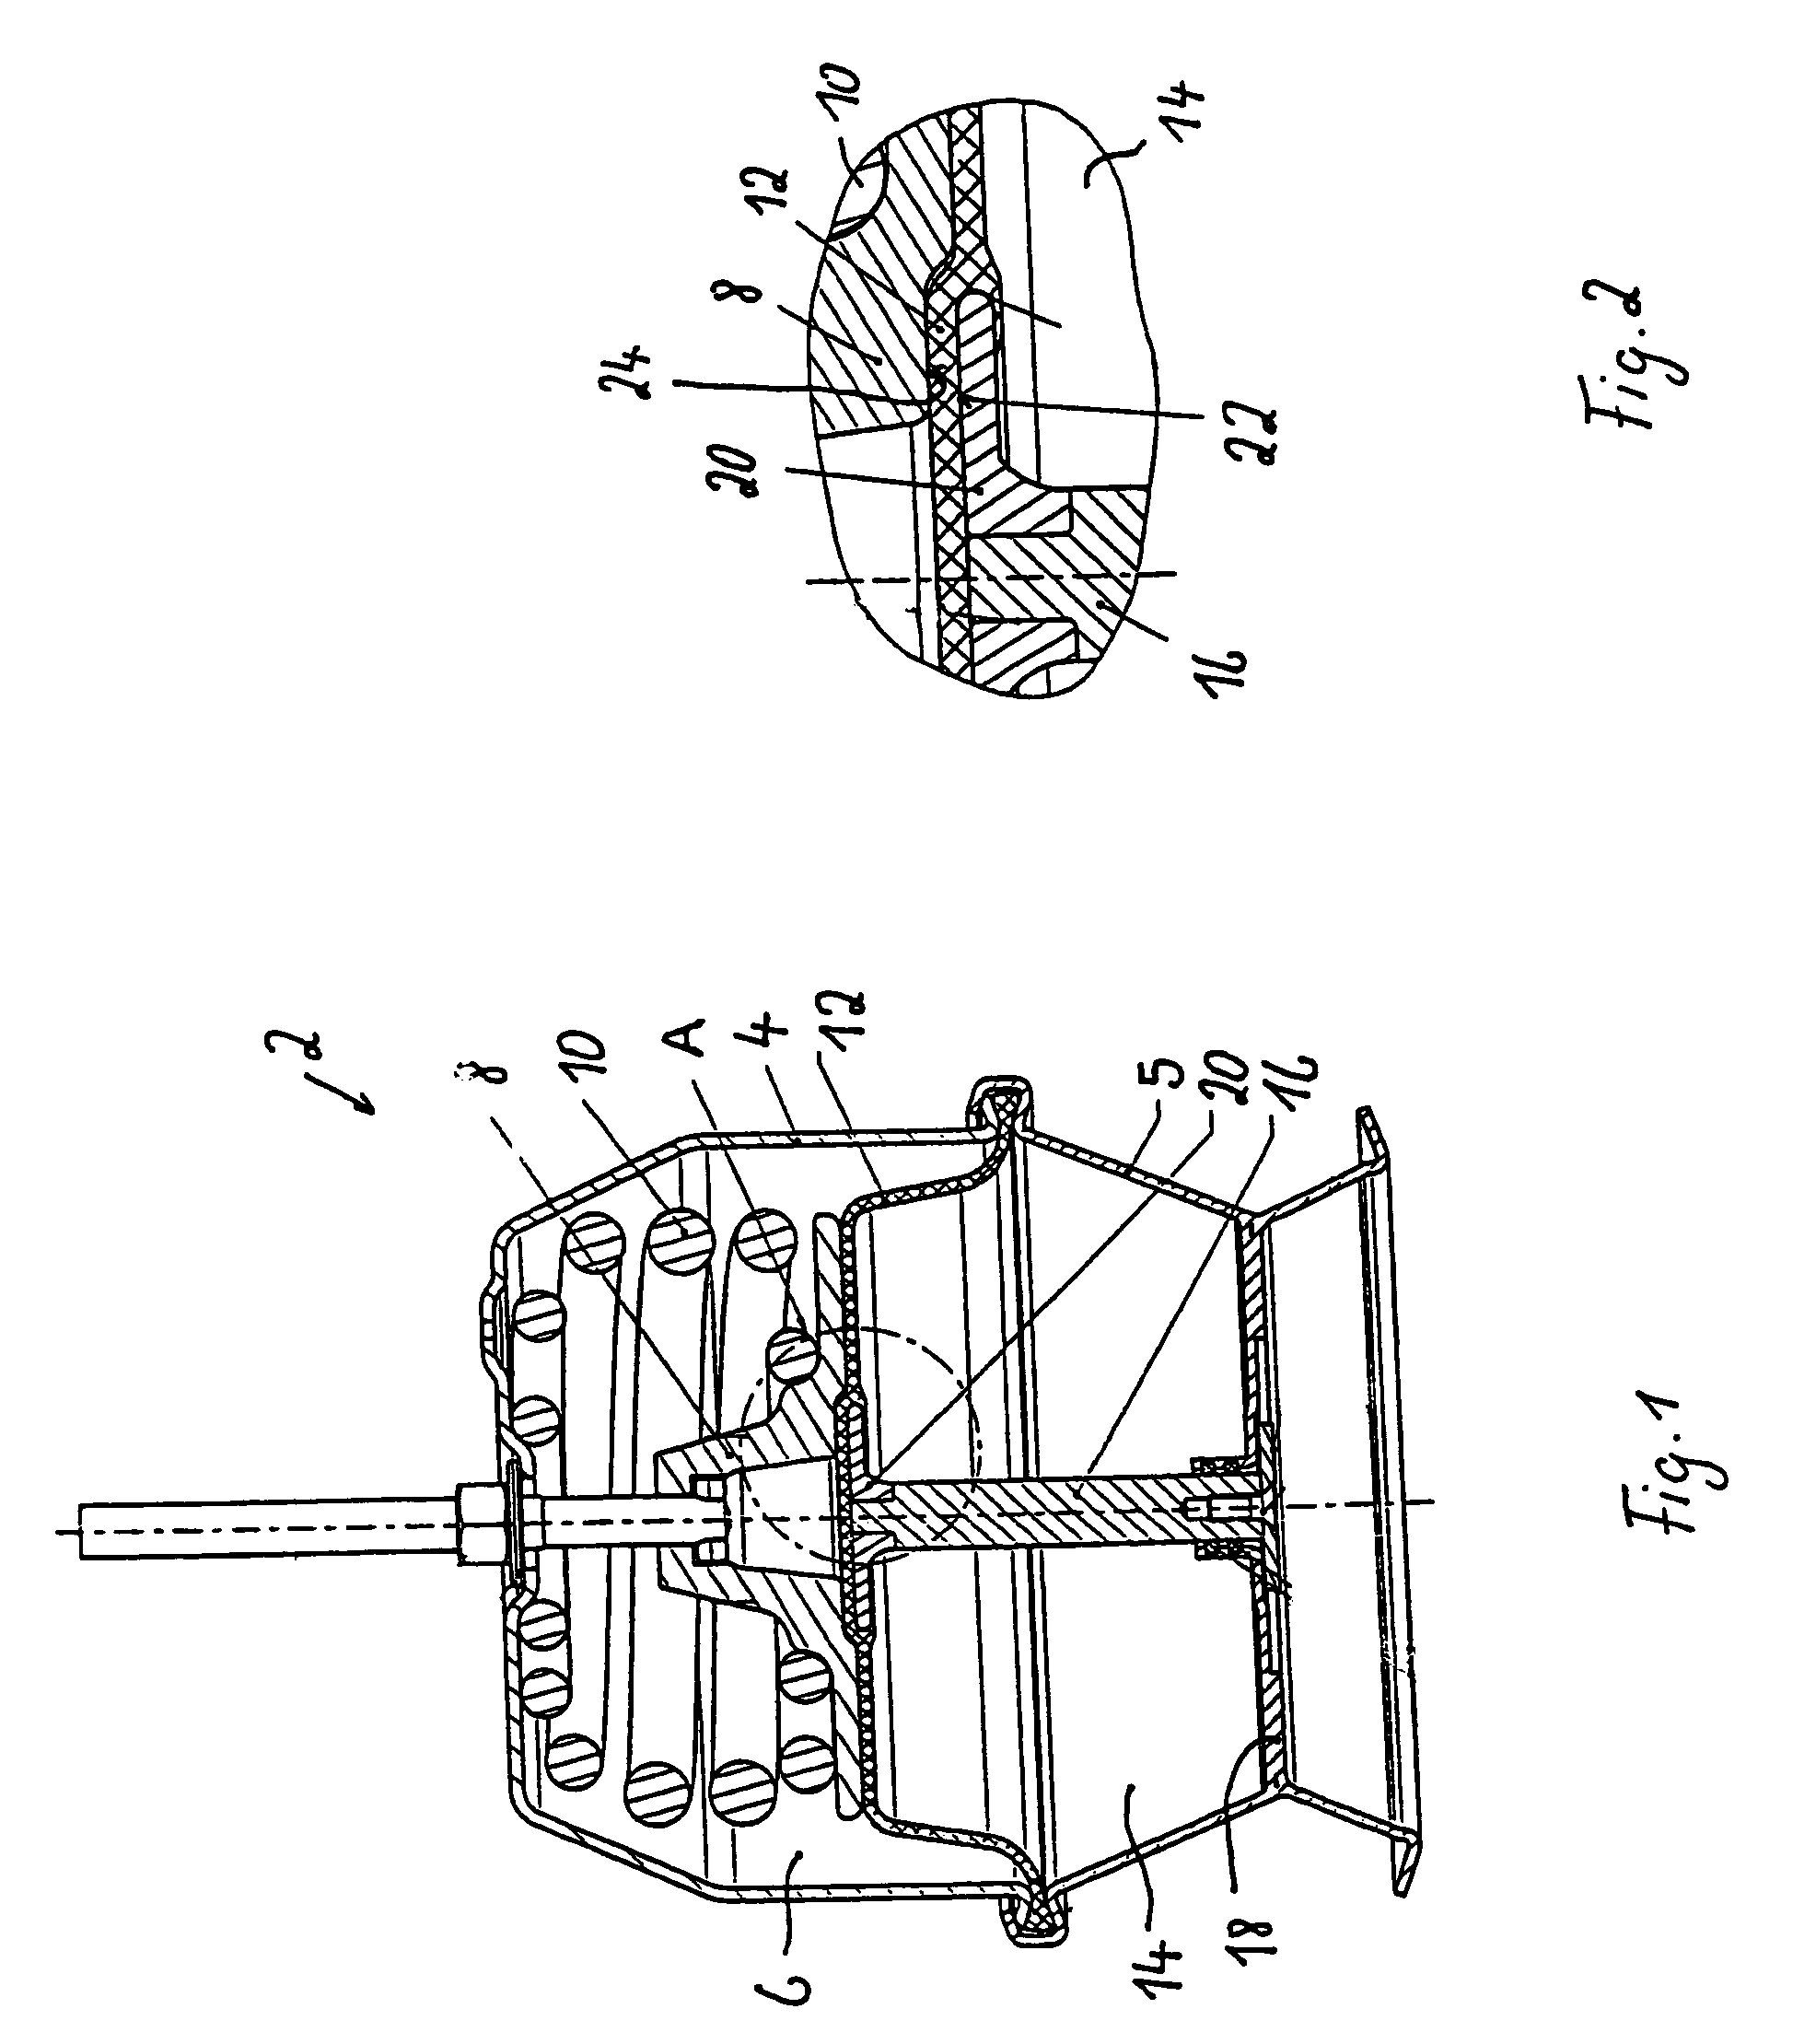 Spring-actuated air-brake cylinder for vehicle brake systems